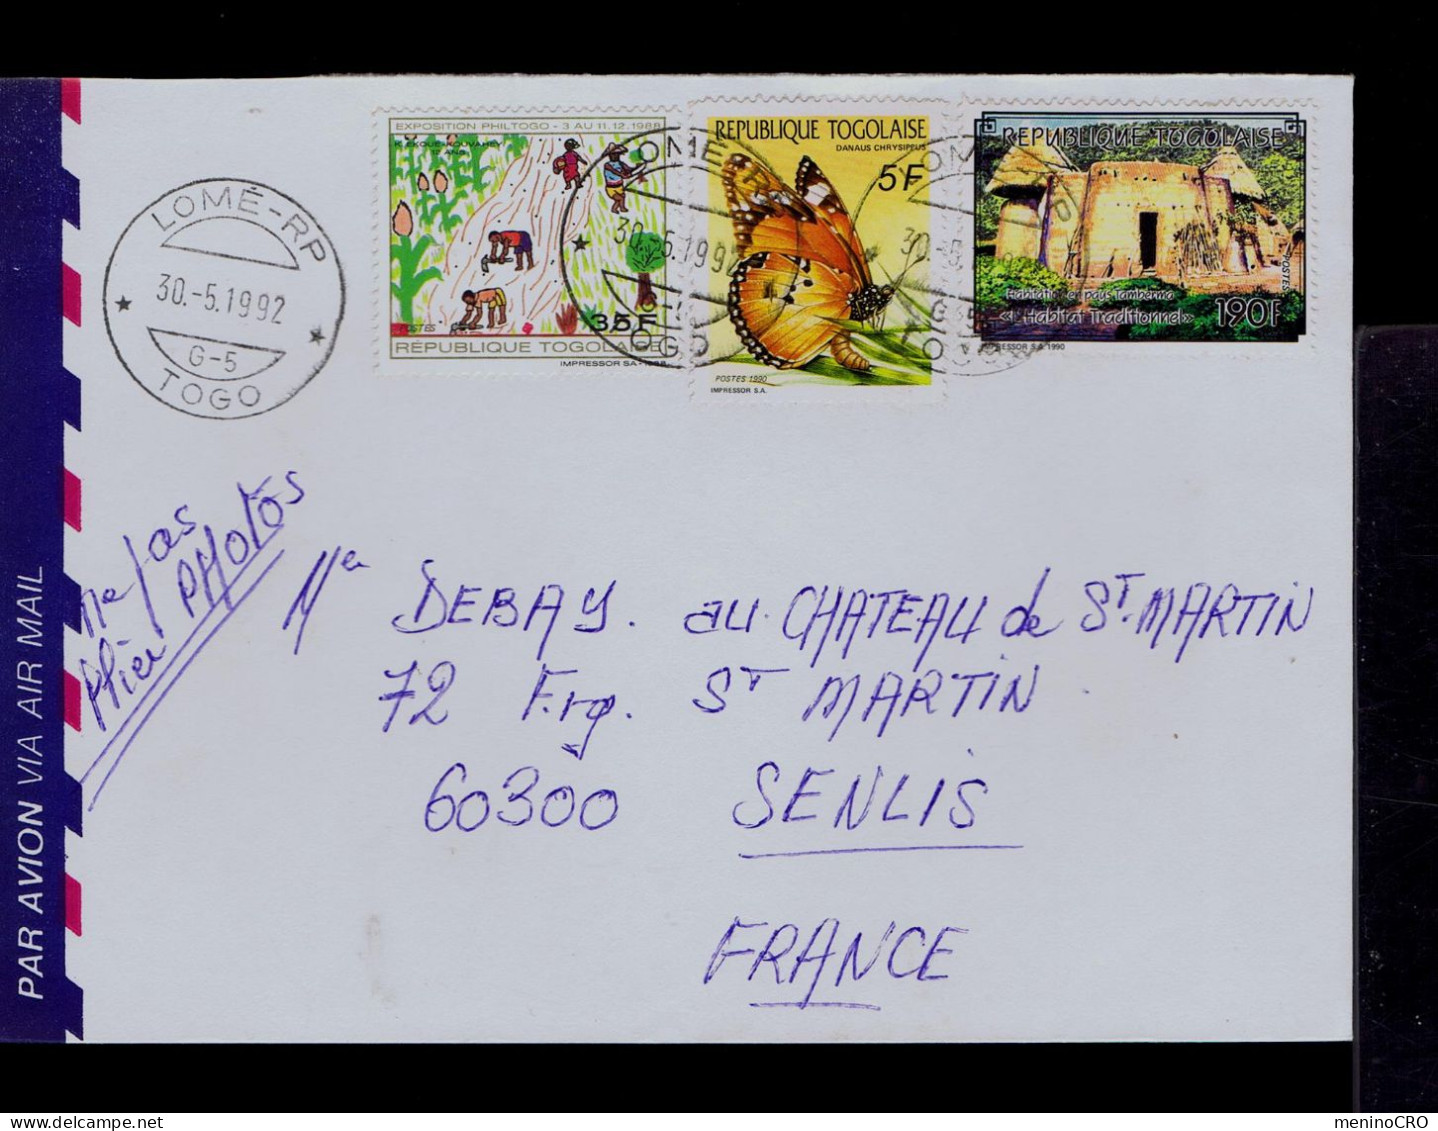 Gc8493 Rep. TOGOLAISE Butterflies Papillons Insectes Agriculture Typical Habitat Traditioneel  Mailed LOMÉ-RP »SENLIS - Agriculture